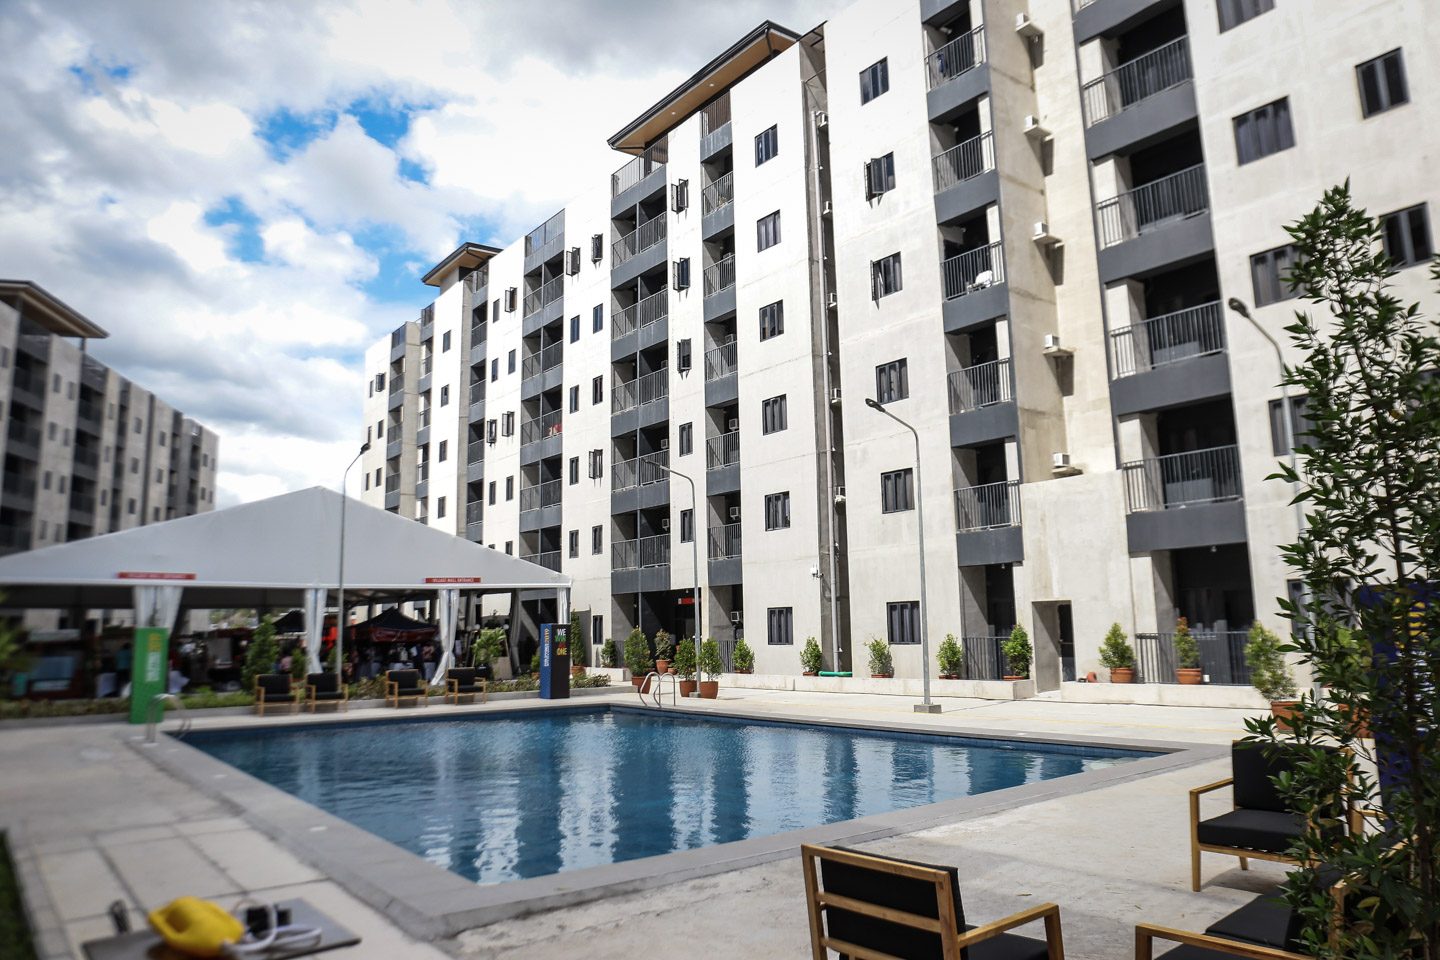 COMFORT. The athlete's village includes a recreational space with a pool to relax. Photo by Josh Albelda/Rappler 